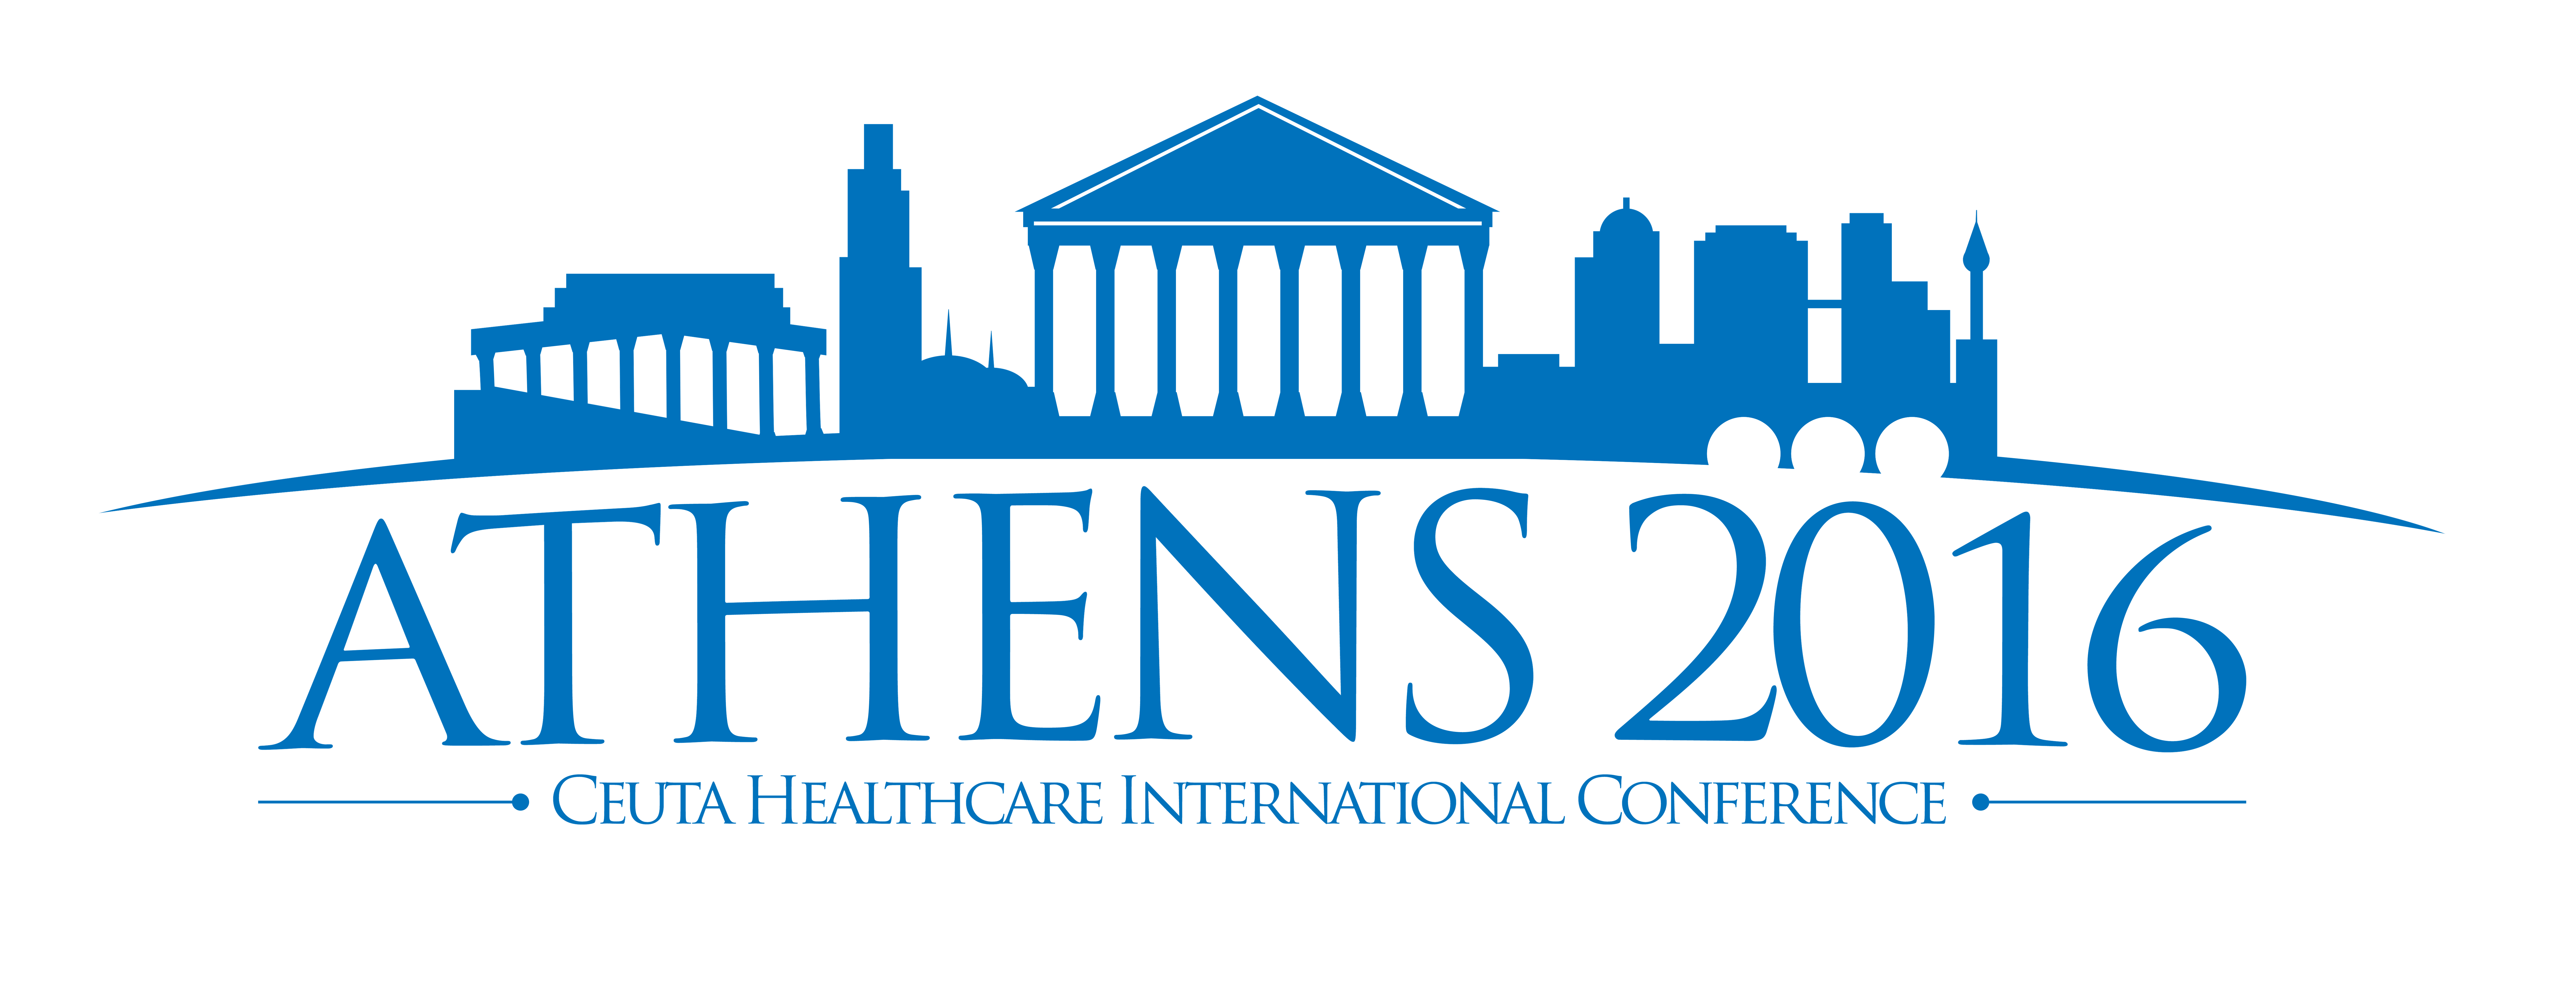 Athens Logo - 2016 Conference - Athens